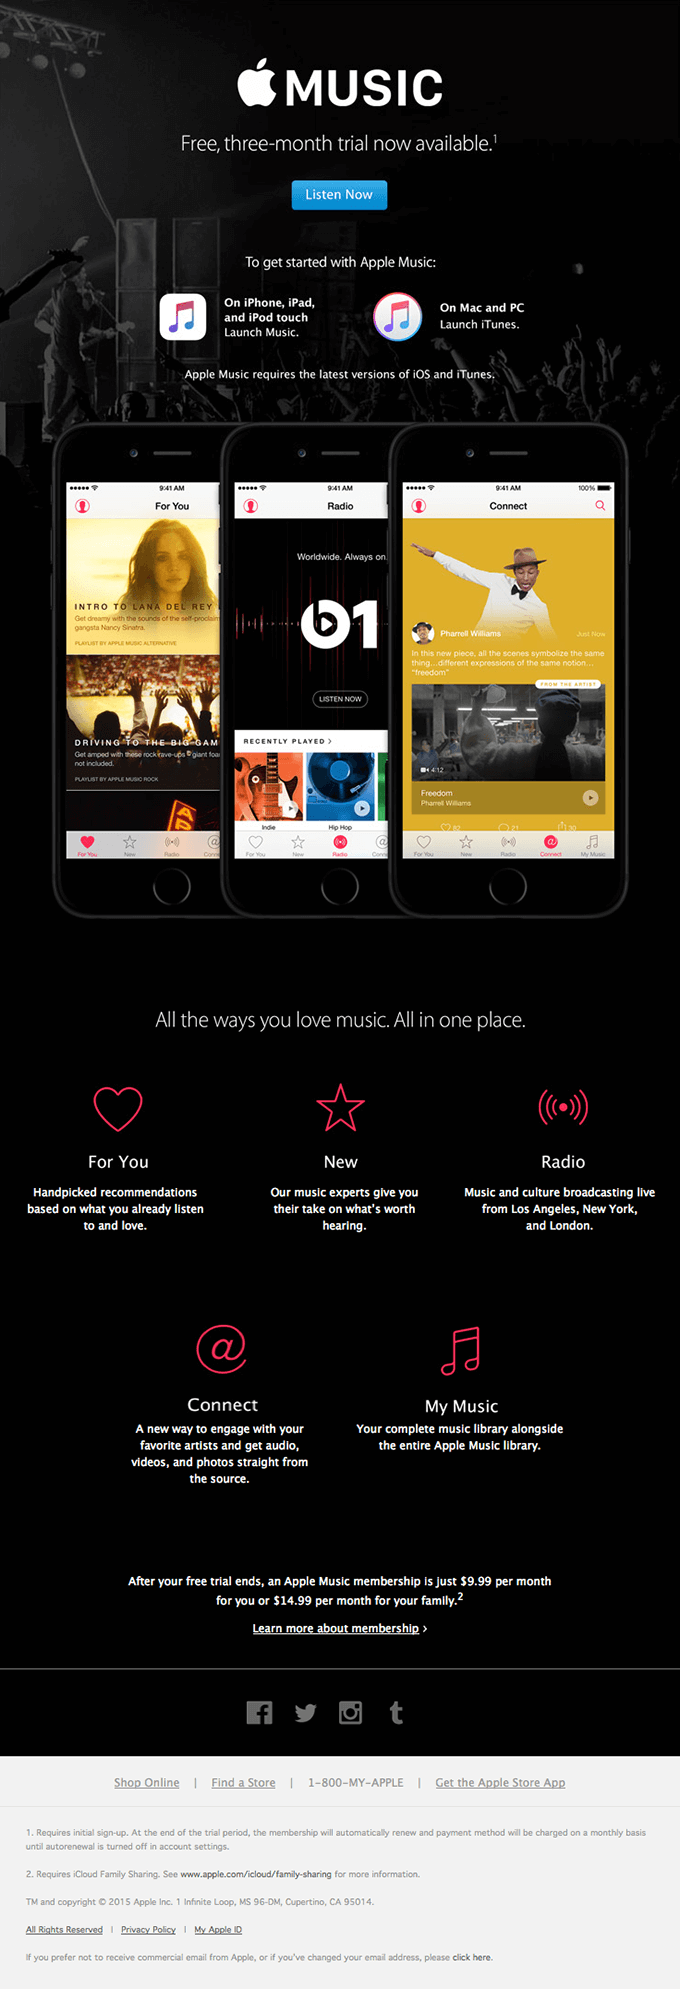 Apple Music free trial email campaign.